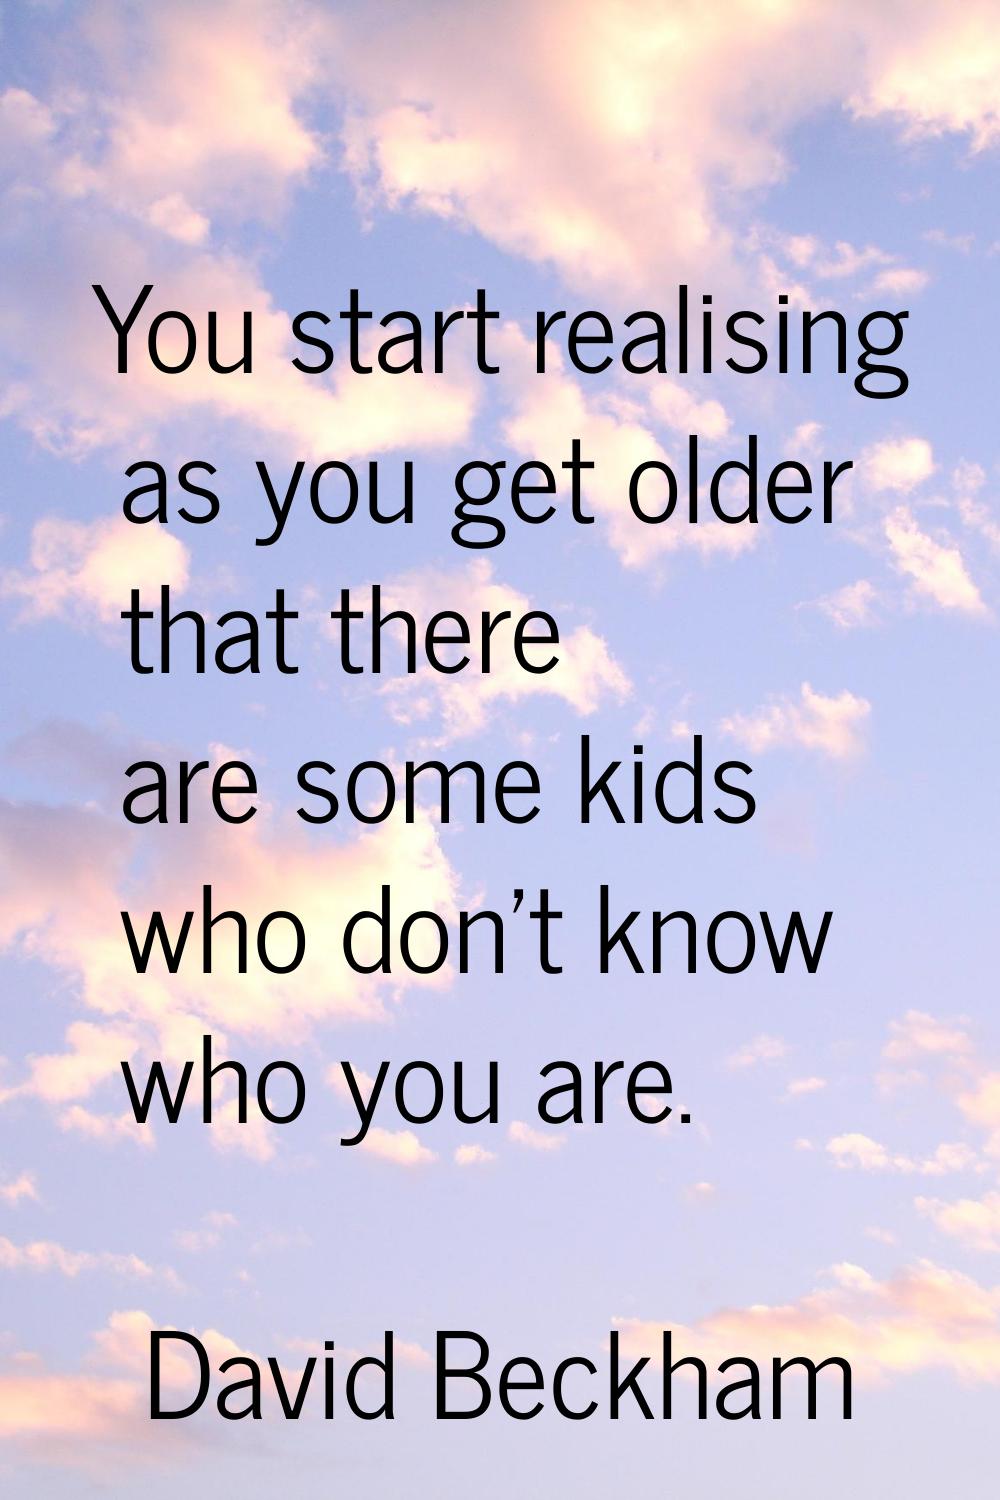 You start realising as you get older that there are some kids who don't know who you are.